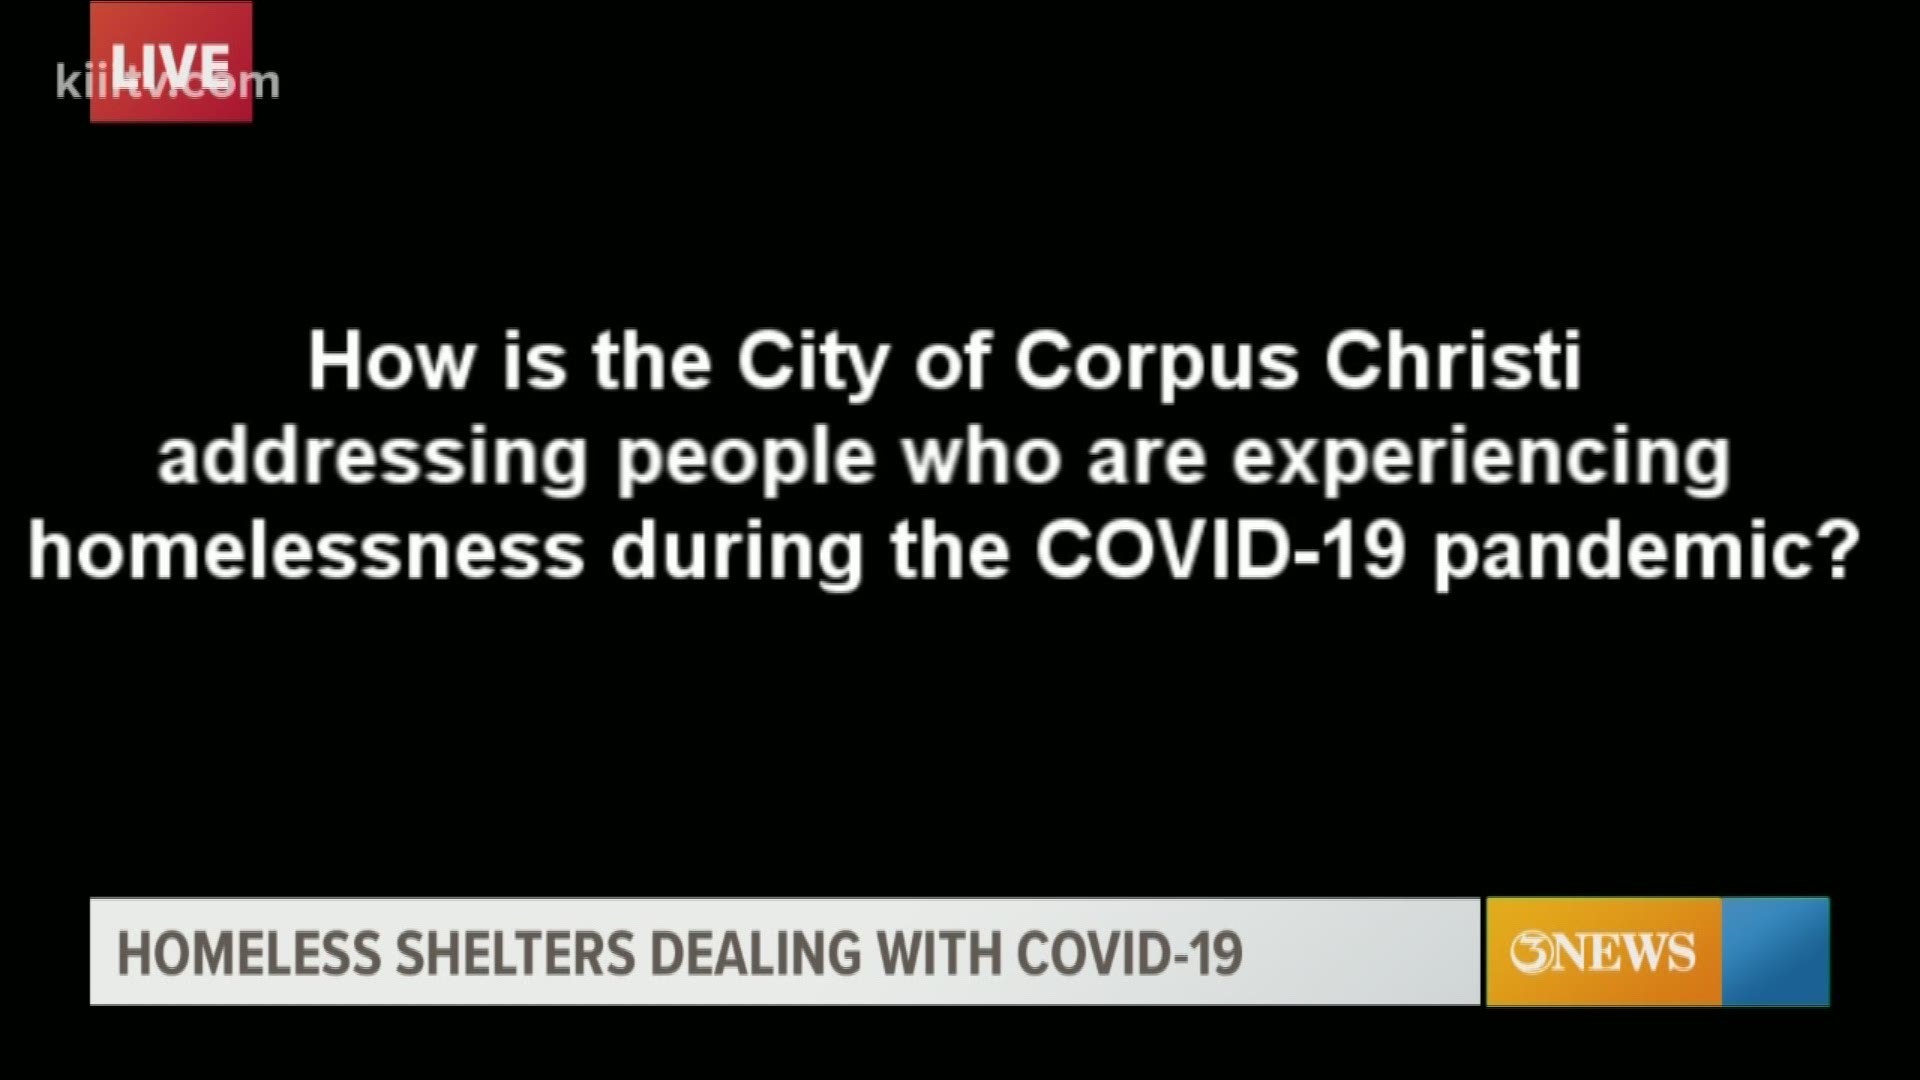 The City of Corpus Christi has not forgotten those living on the streets as we all battle COVID-19.